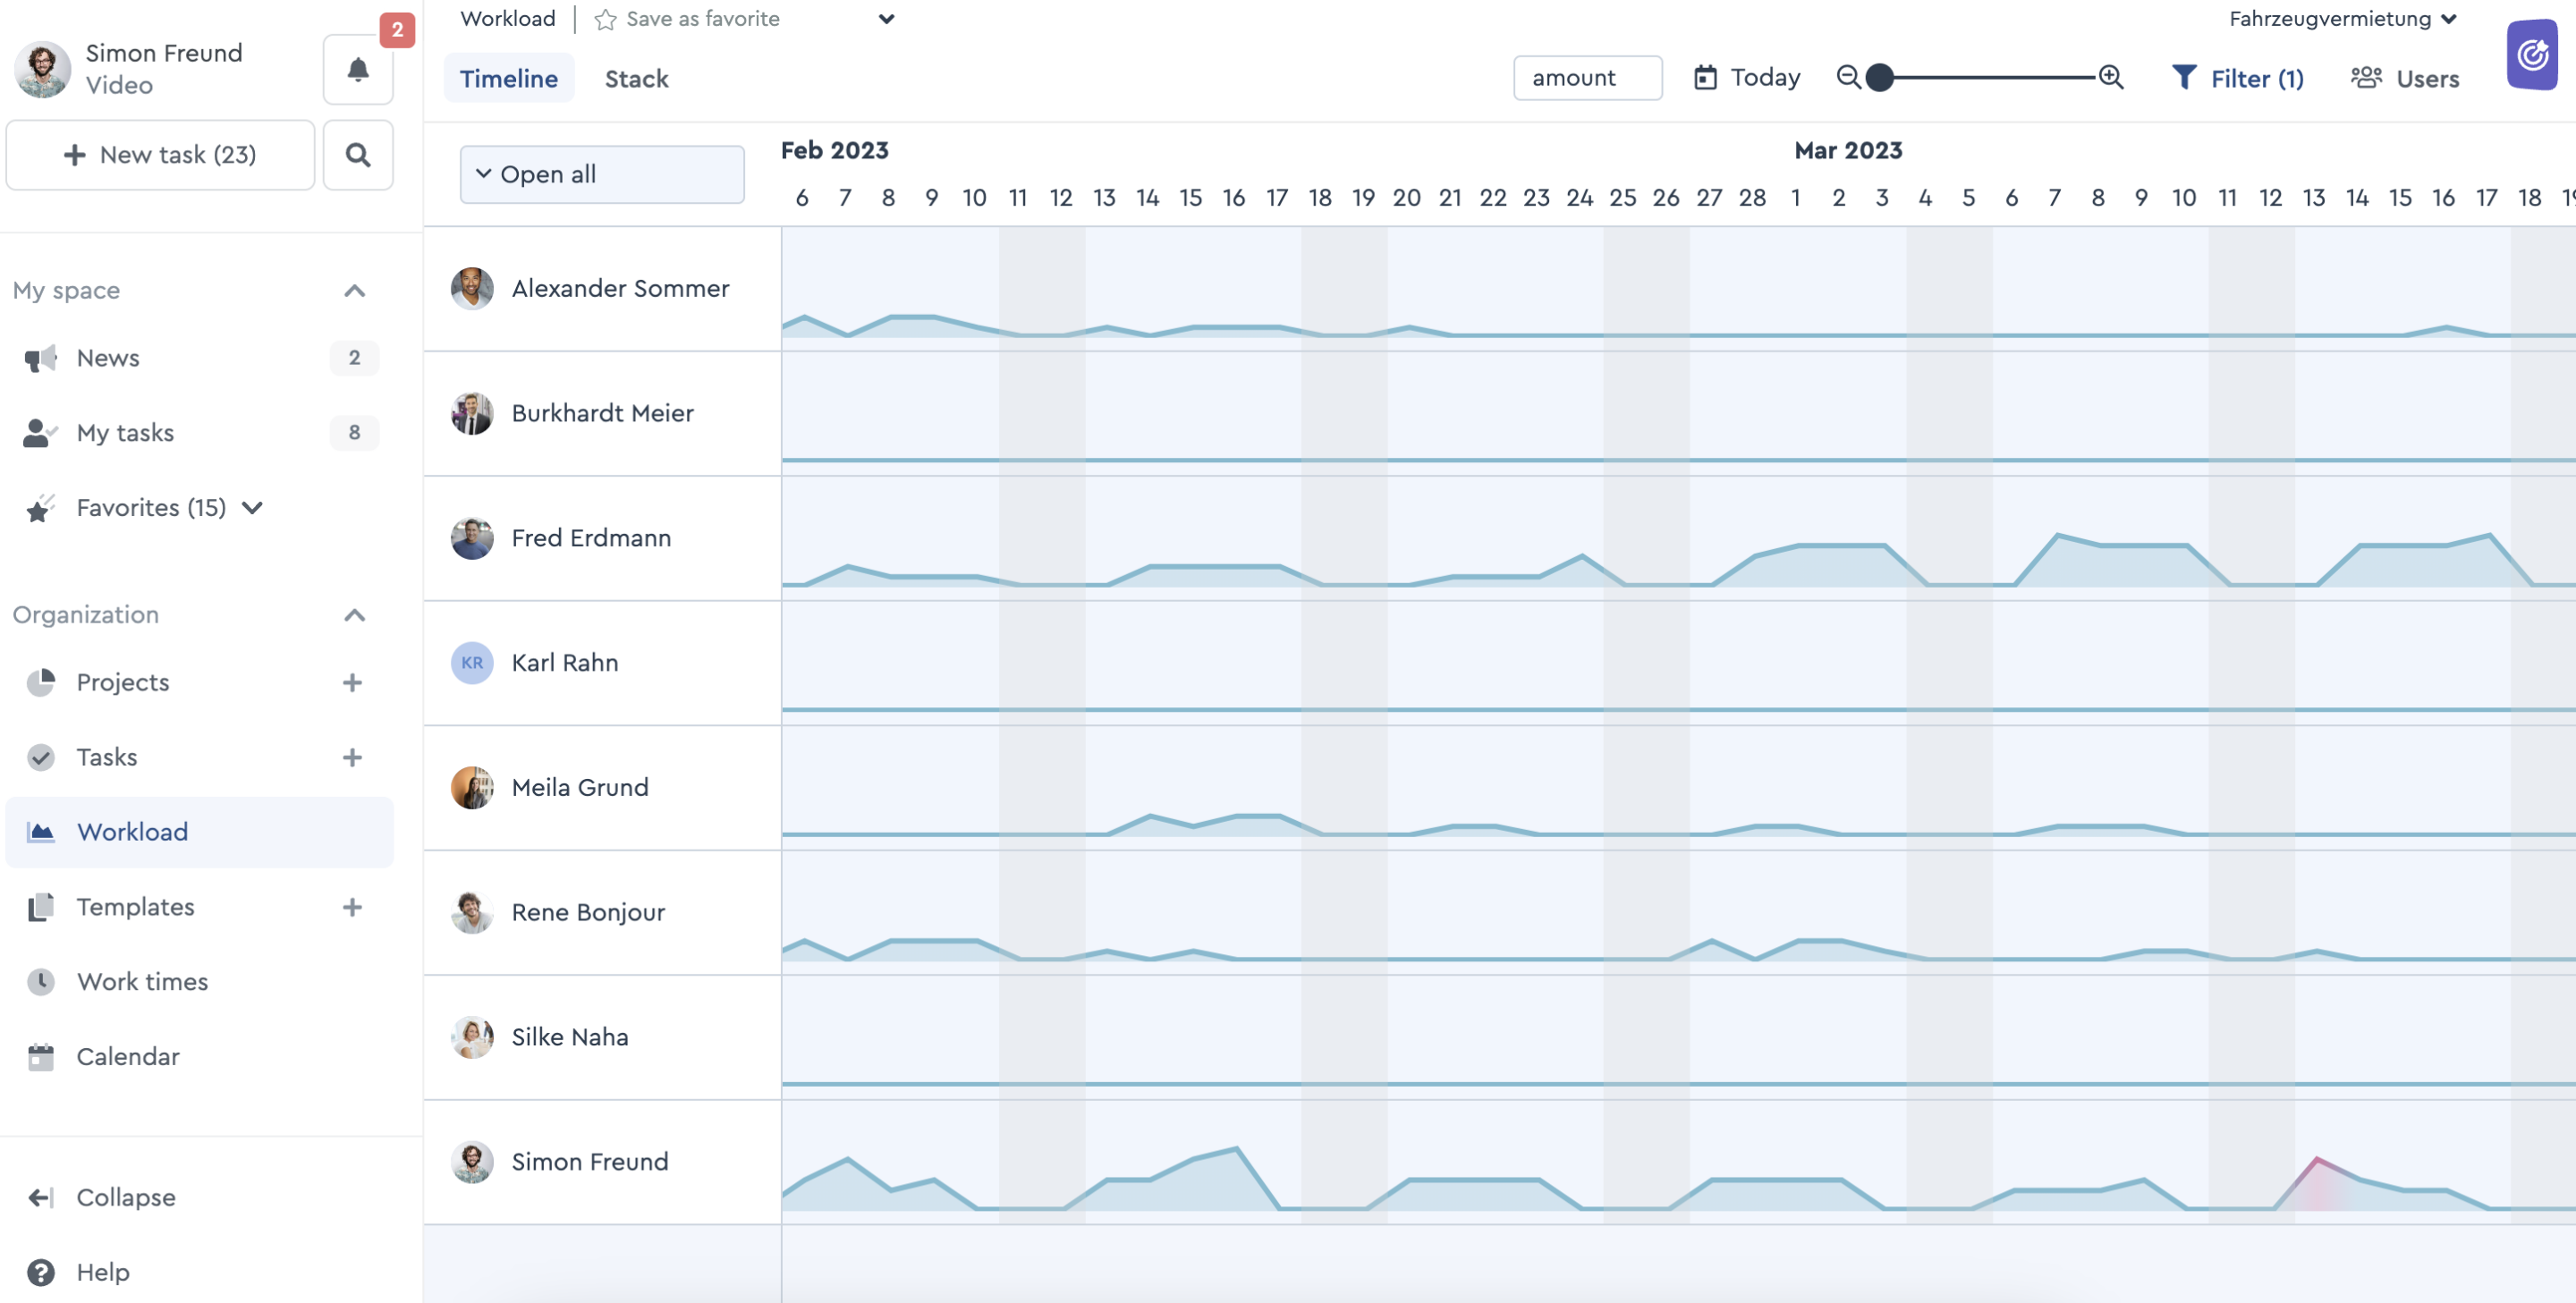 The workload overview shows you, for example, load peaks